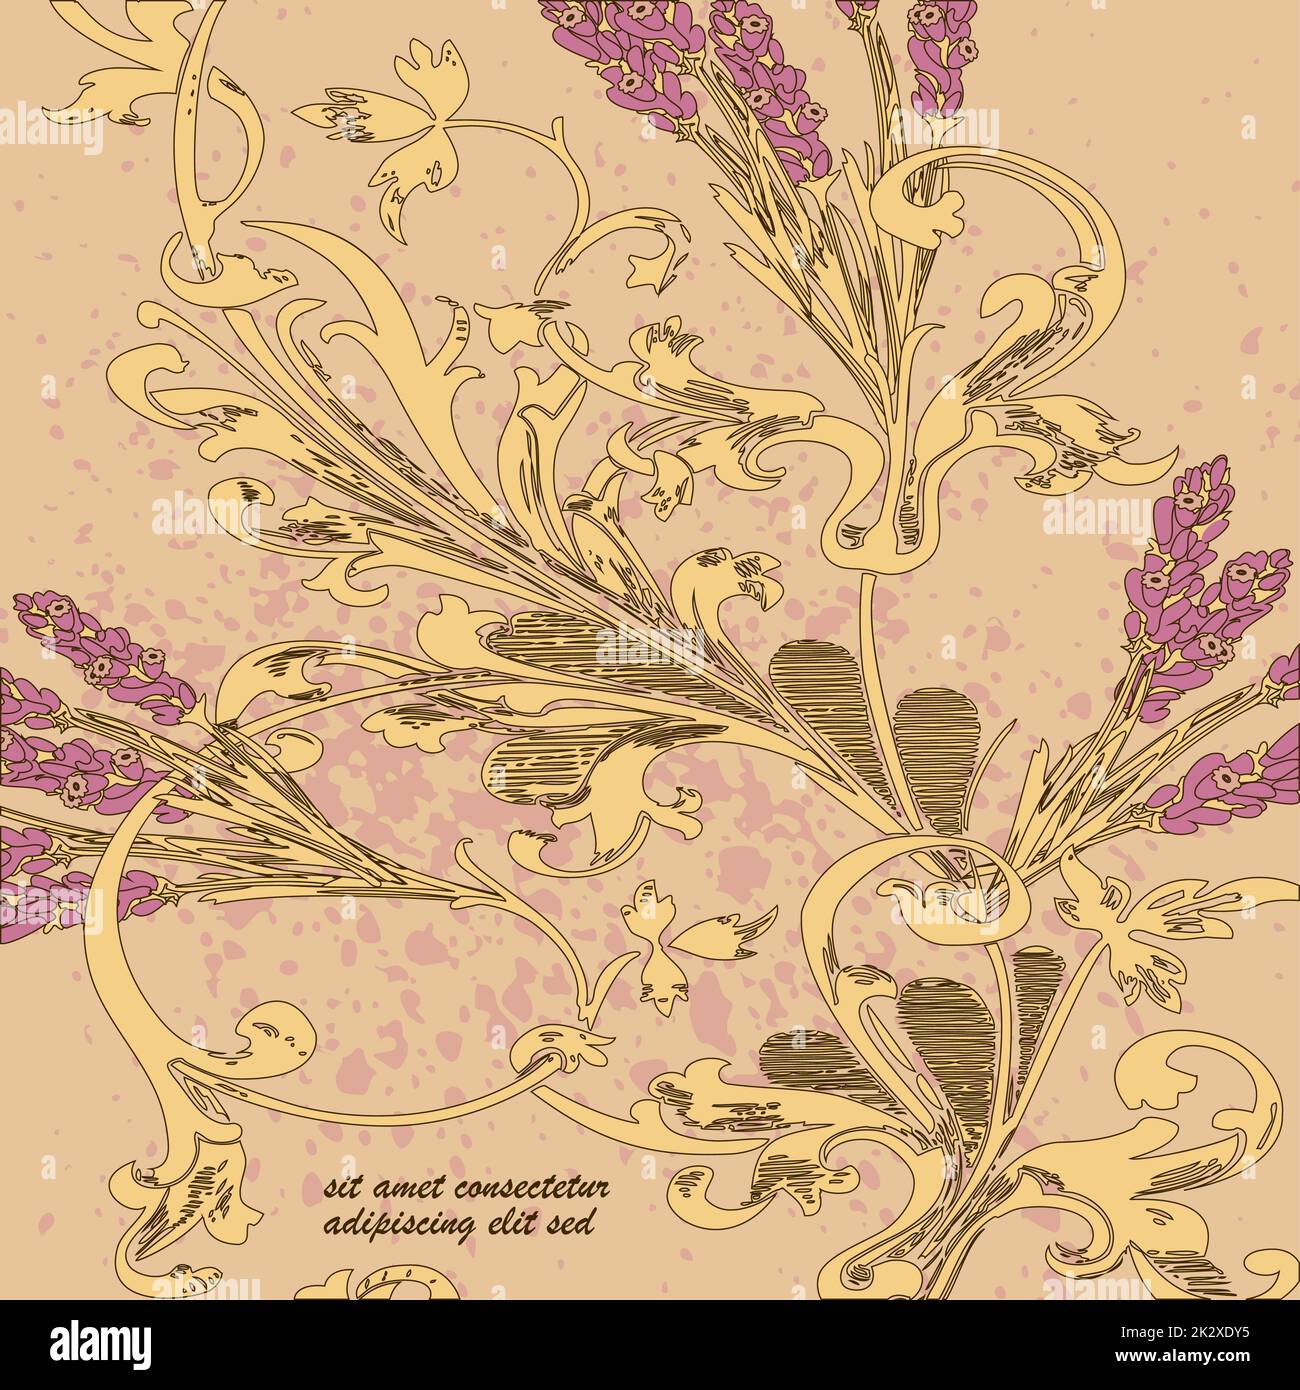 Hand drawn lavender flowers on beige, abstract floral pattern cover design. Blossom greenery branches, trendy artistic background. Graphic vector illustration wedding, poster, greeting card, magazine Stock Photo